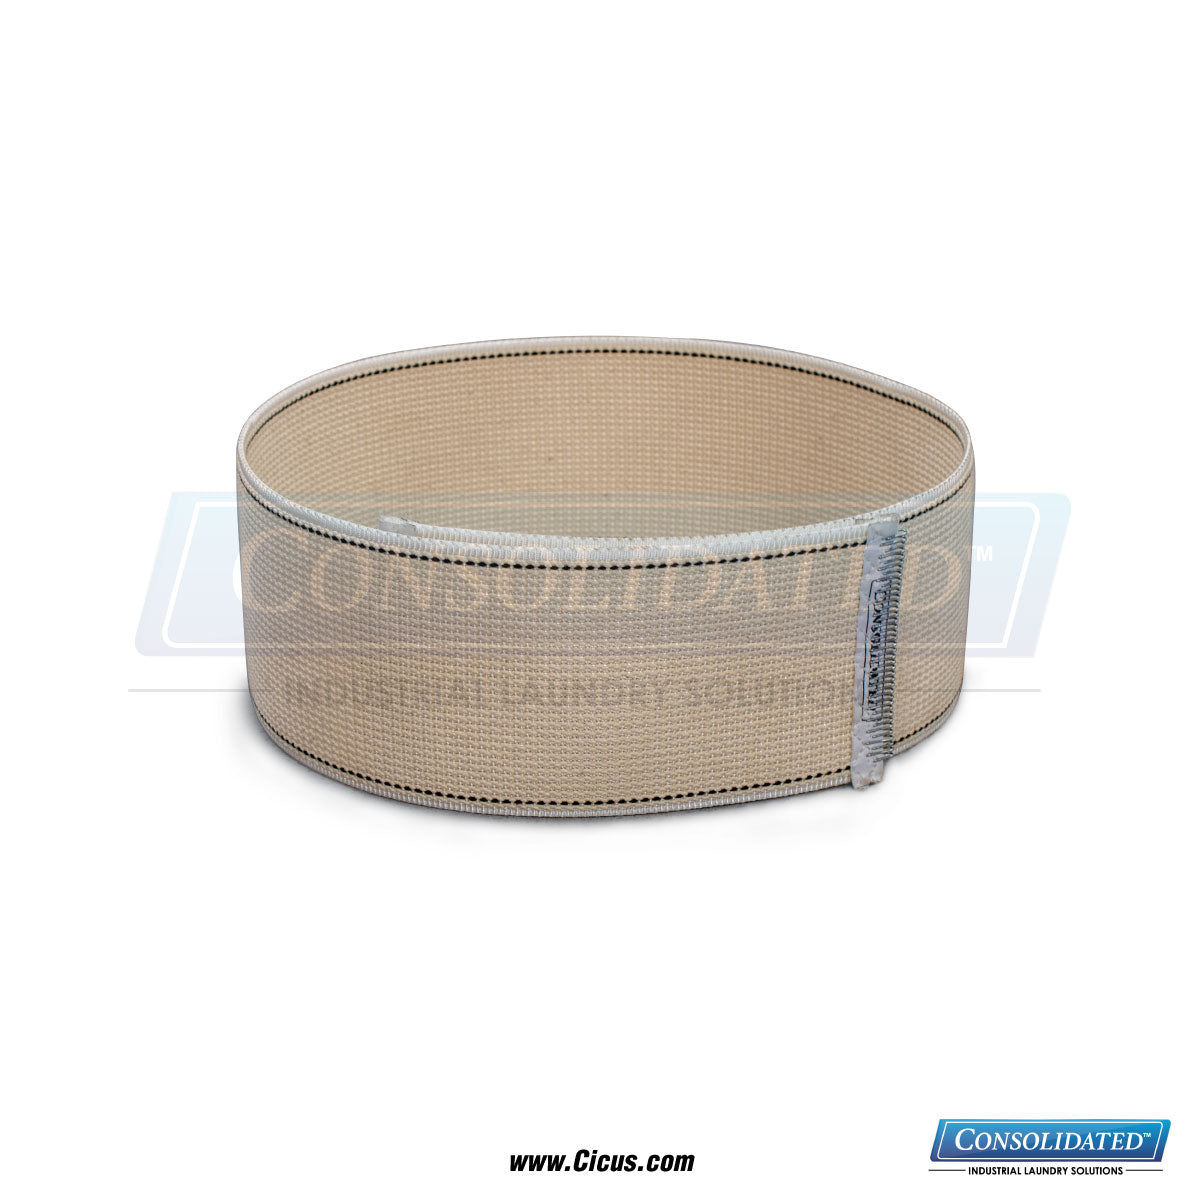 CIC Exclusive Chicago Dryer Canvas Ribbon - 2" x 110" (1001-185)